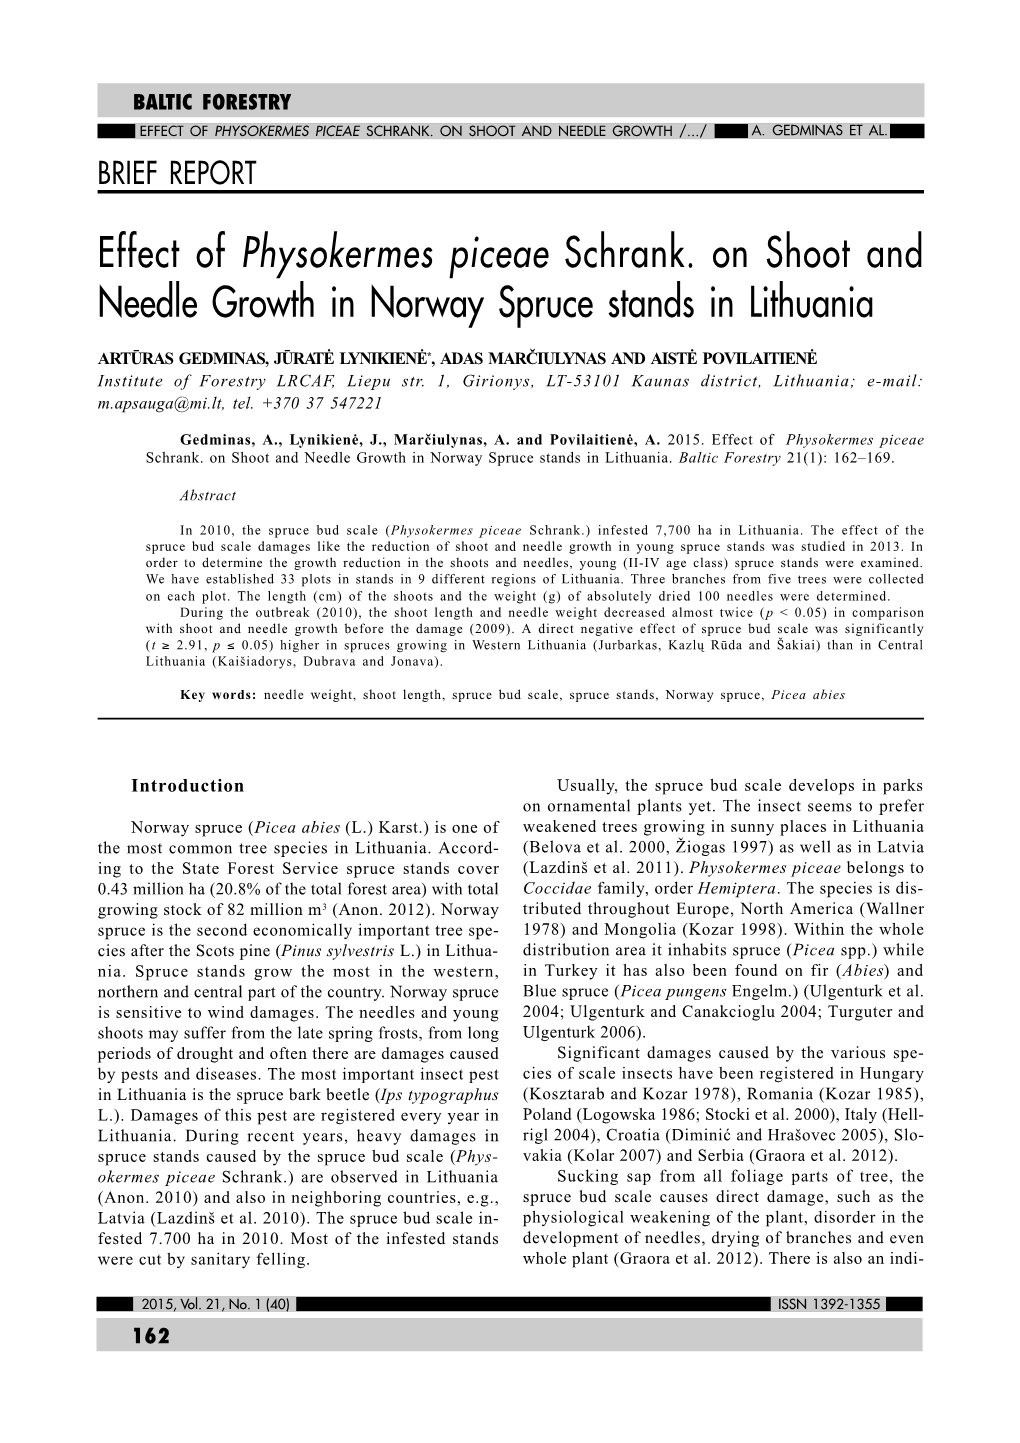 Effect of Physokermes Piceae Schrank. on Shoot and Needle Growth in Norway Spruce Stands in Lithuania